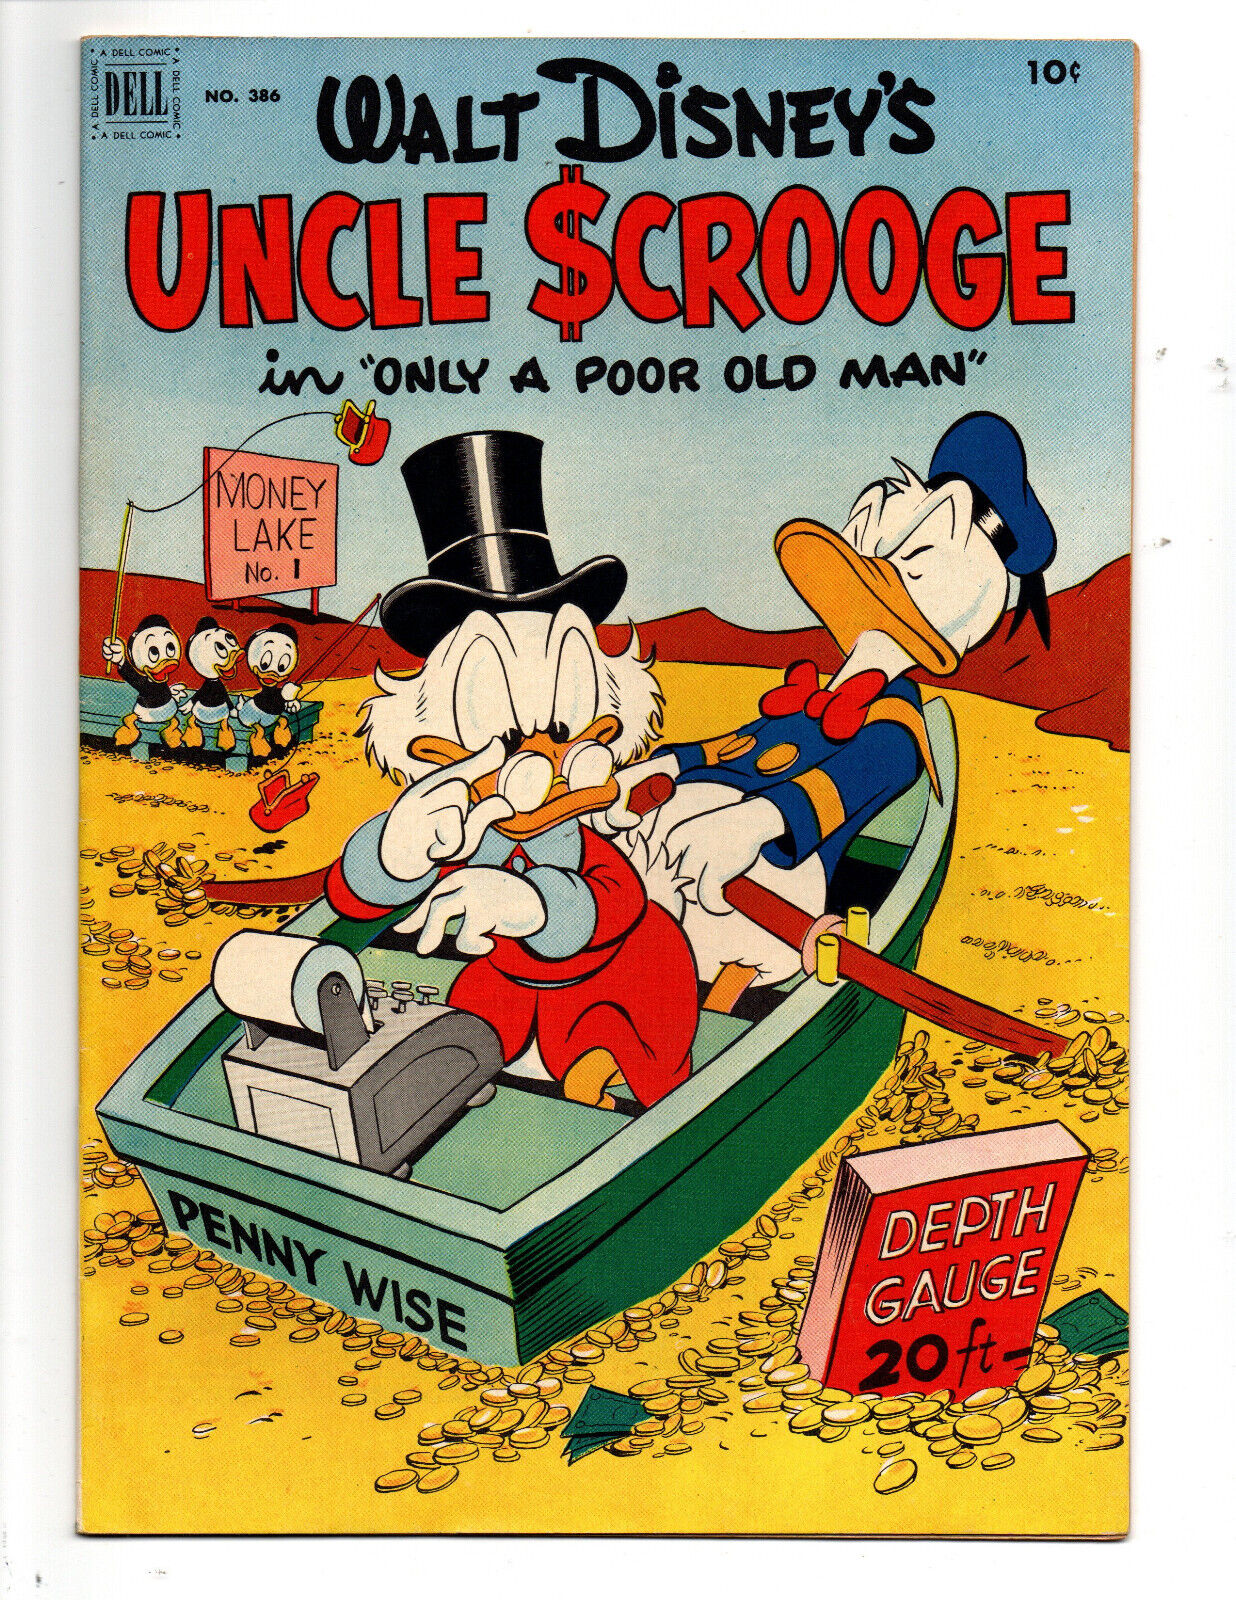 Uncle Scrooge #1   FC 386   VFine+   1952   Carl Barks   US shipping only